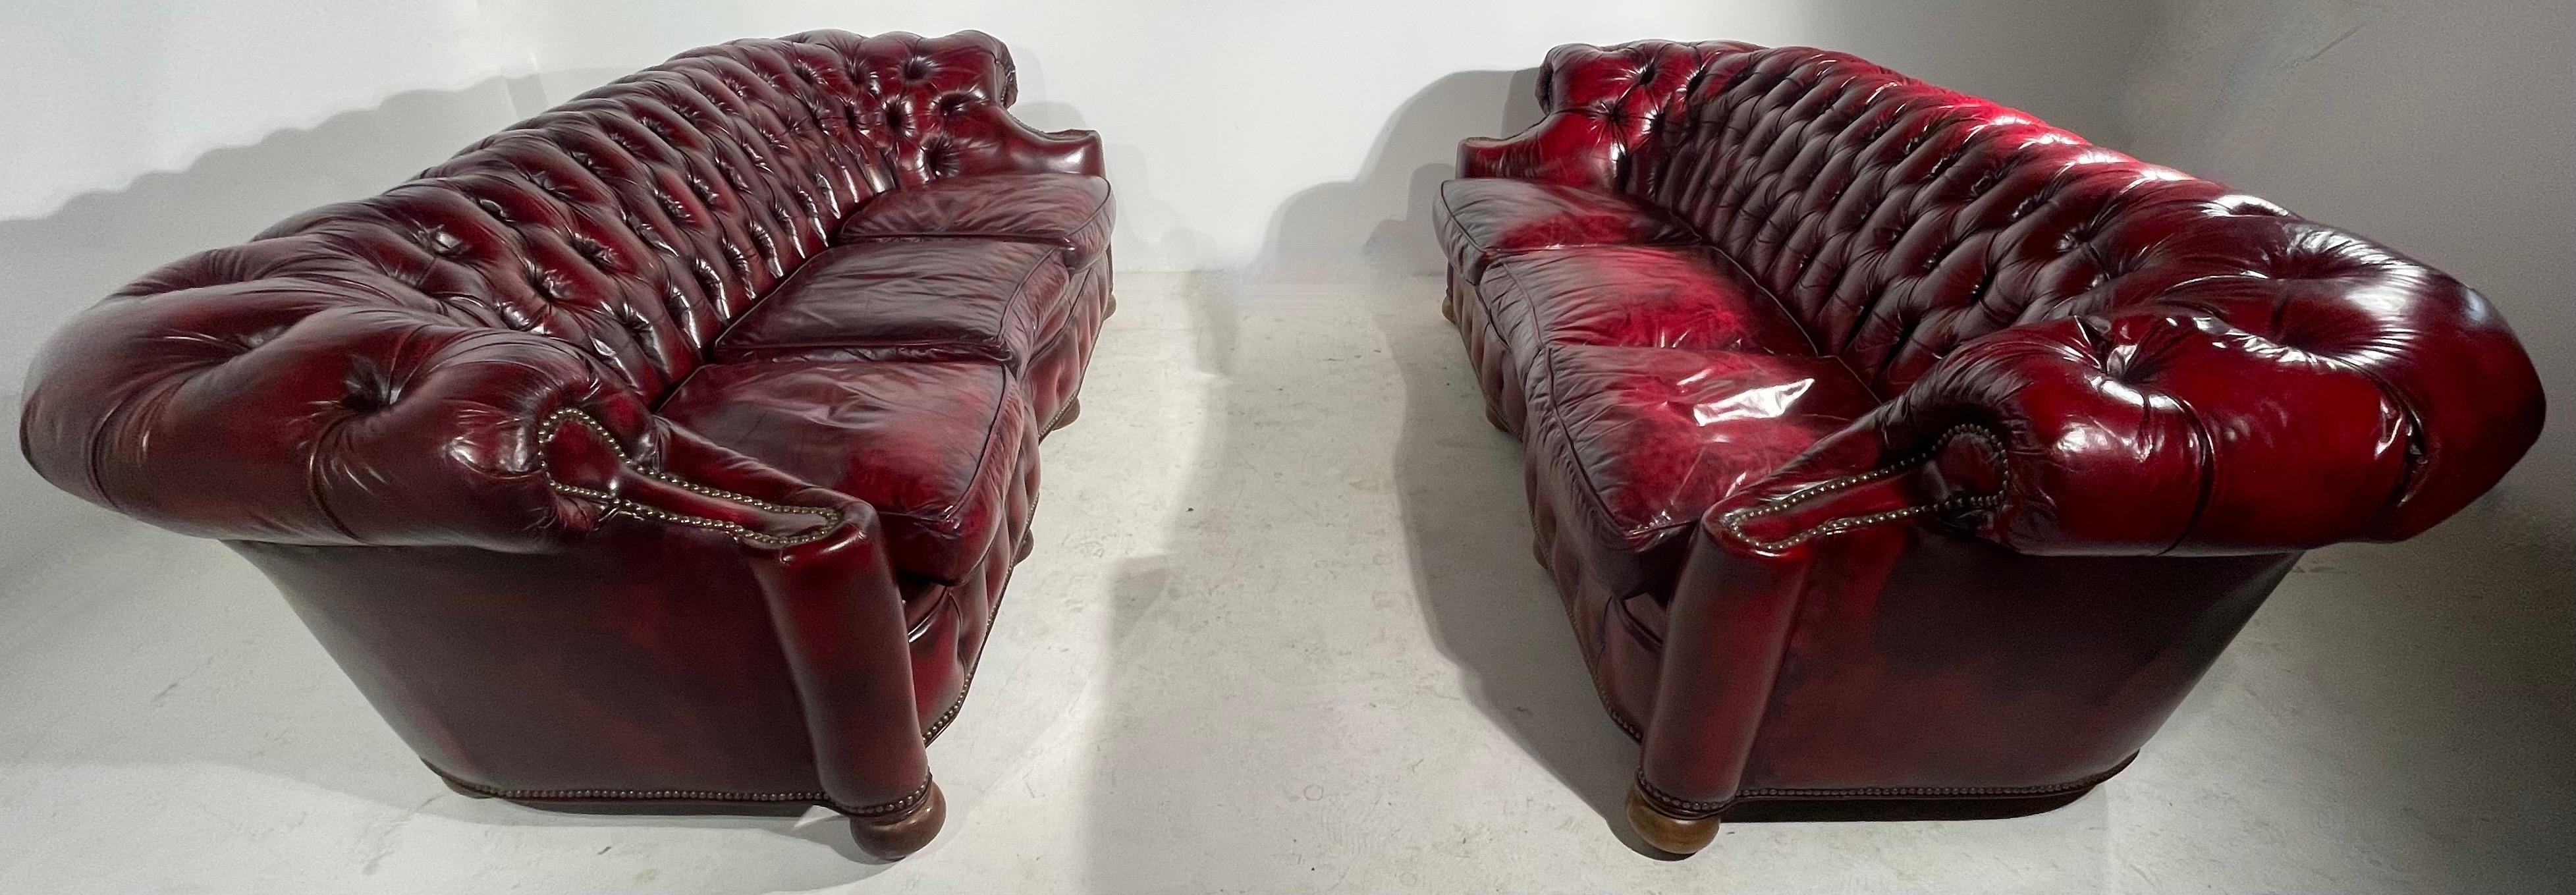 Pr. C Shape Tufted Leather Chesterfield Sofas 11